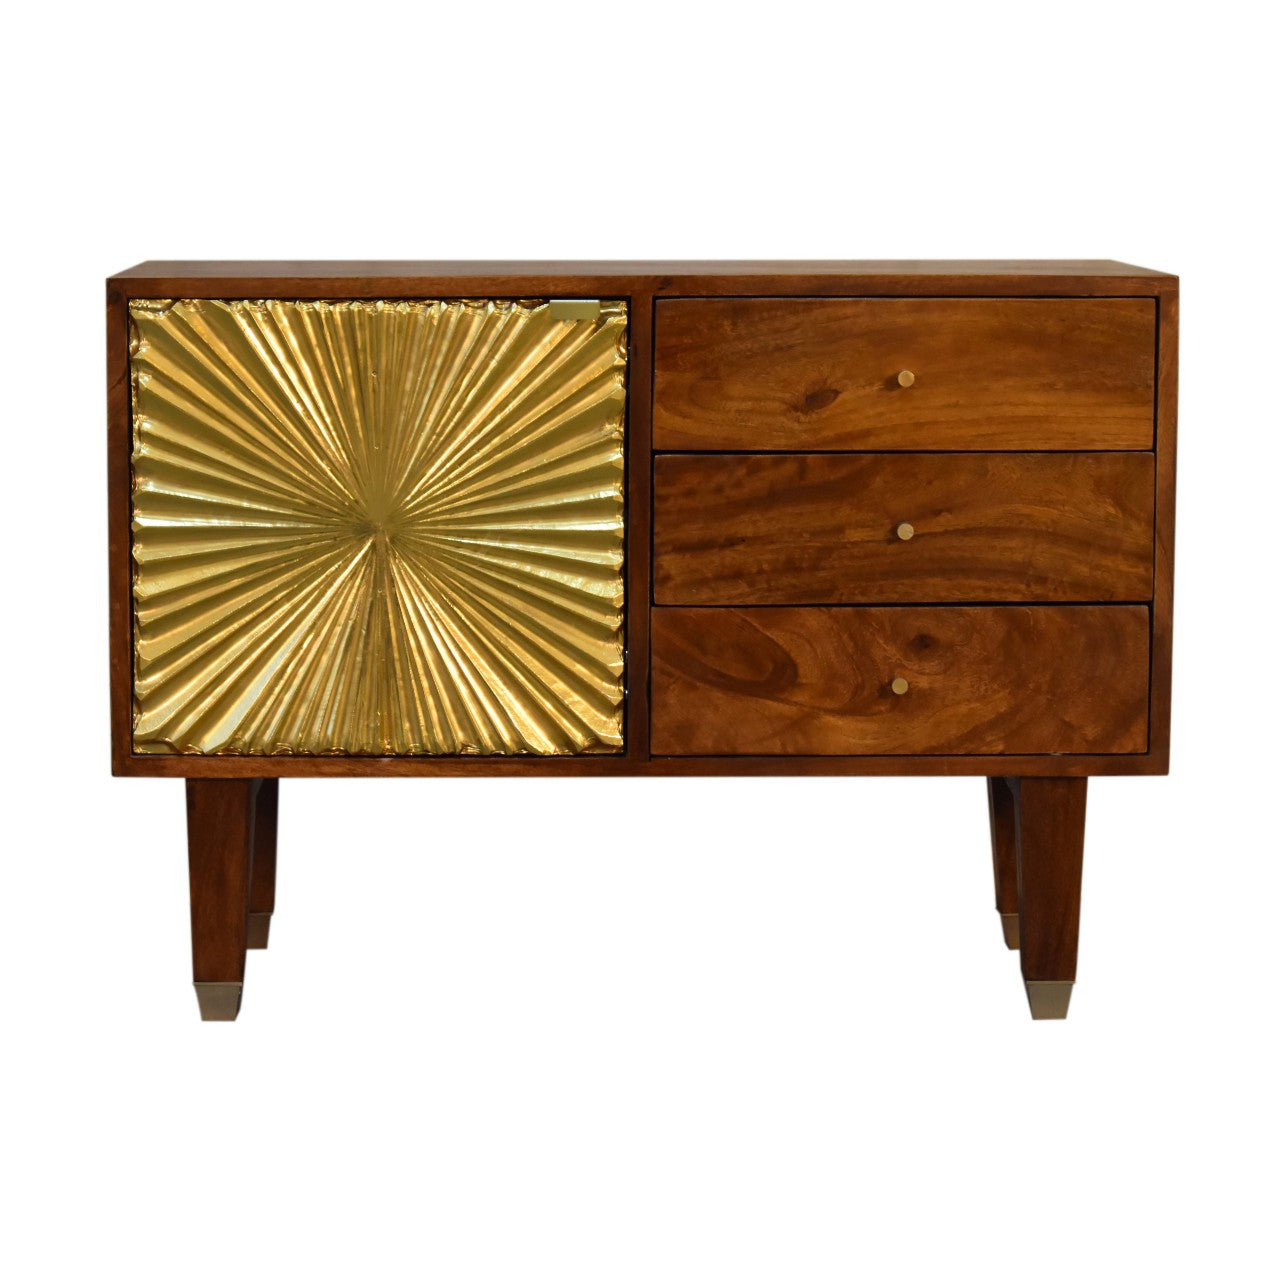 View Manila Gold Tapered Sideboard information